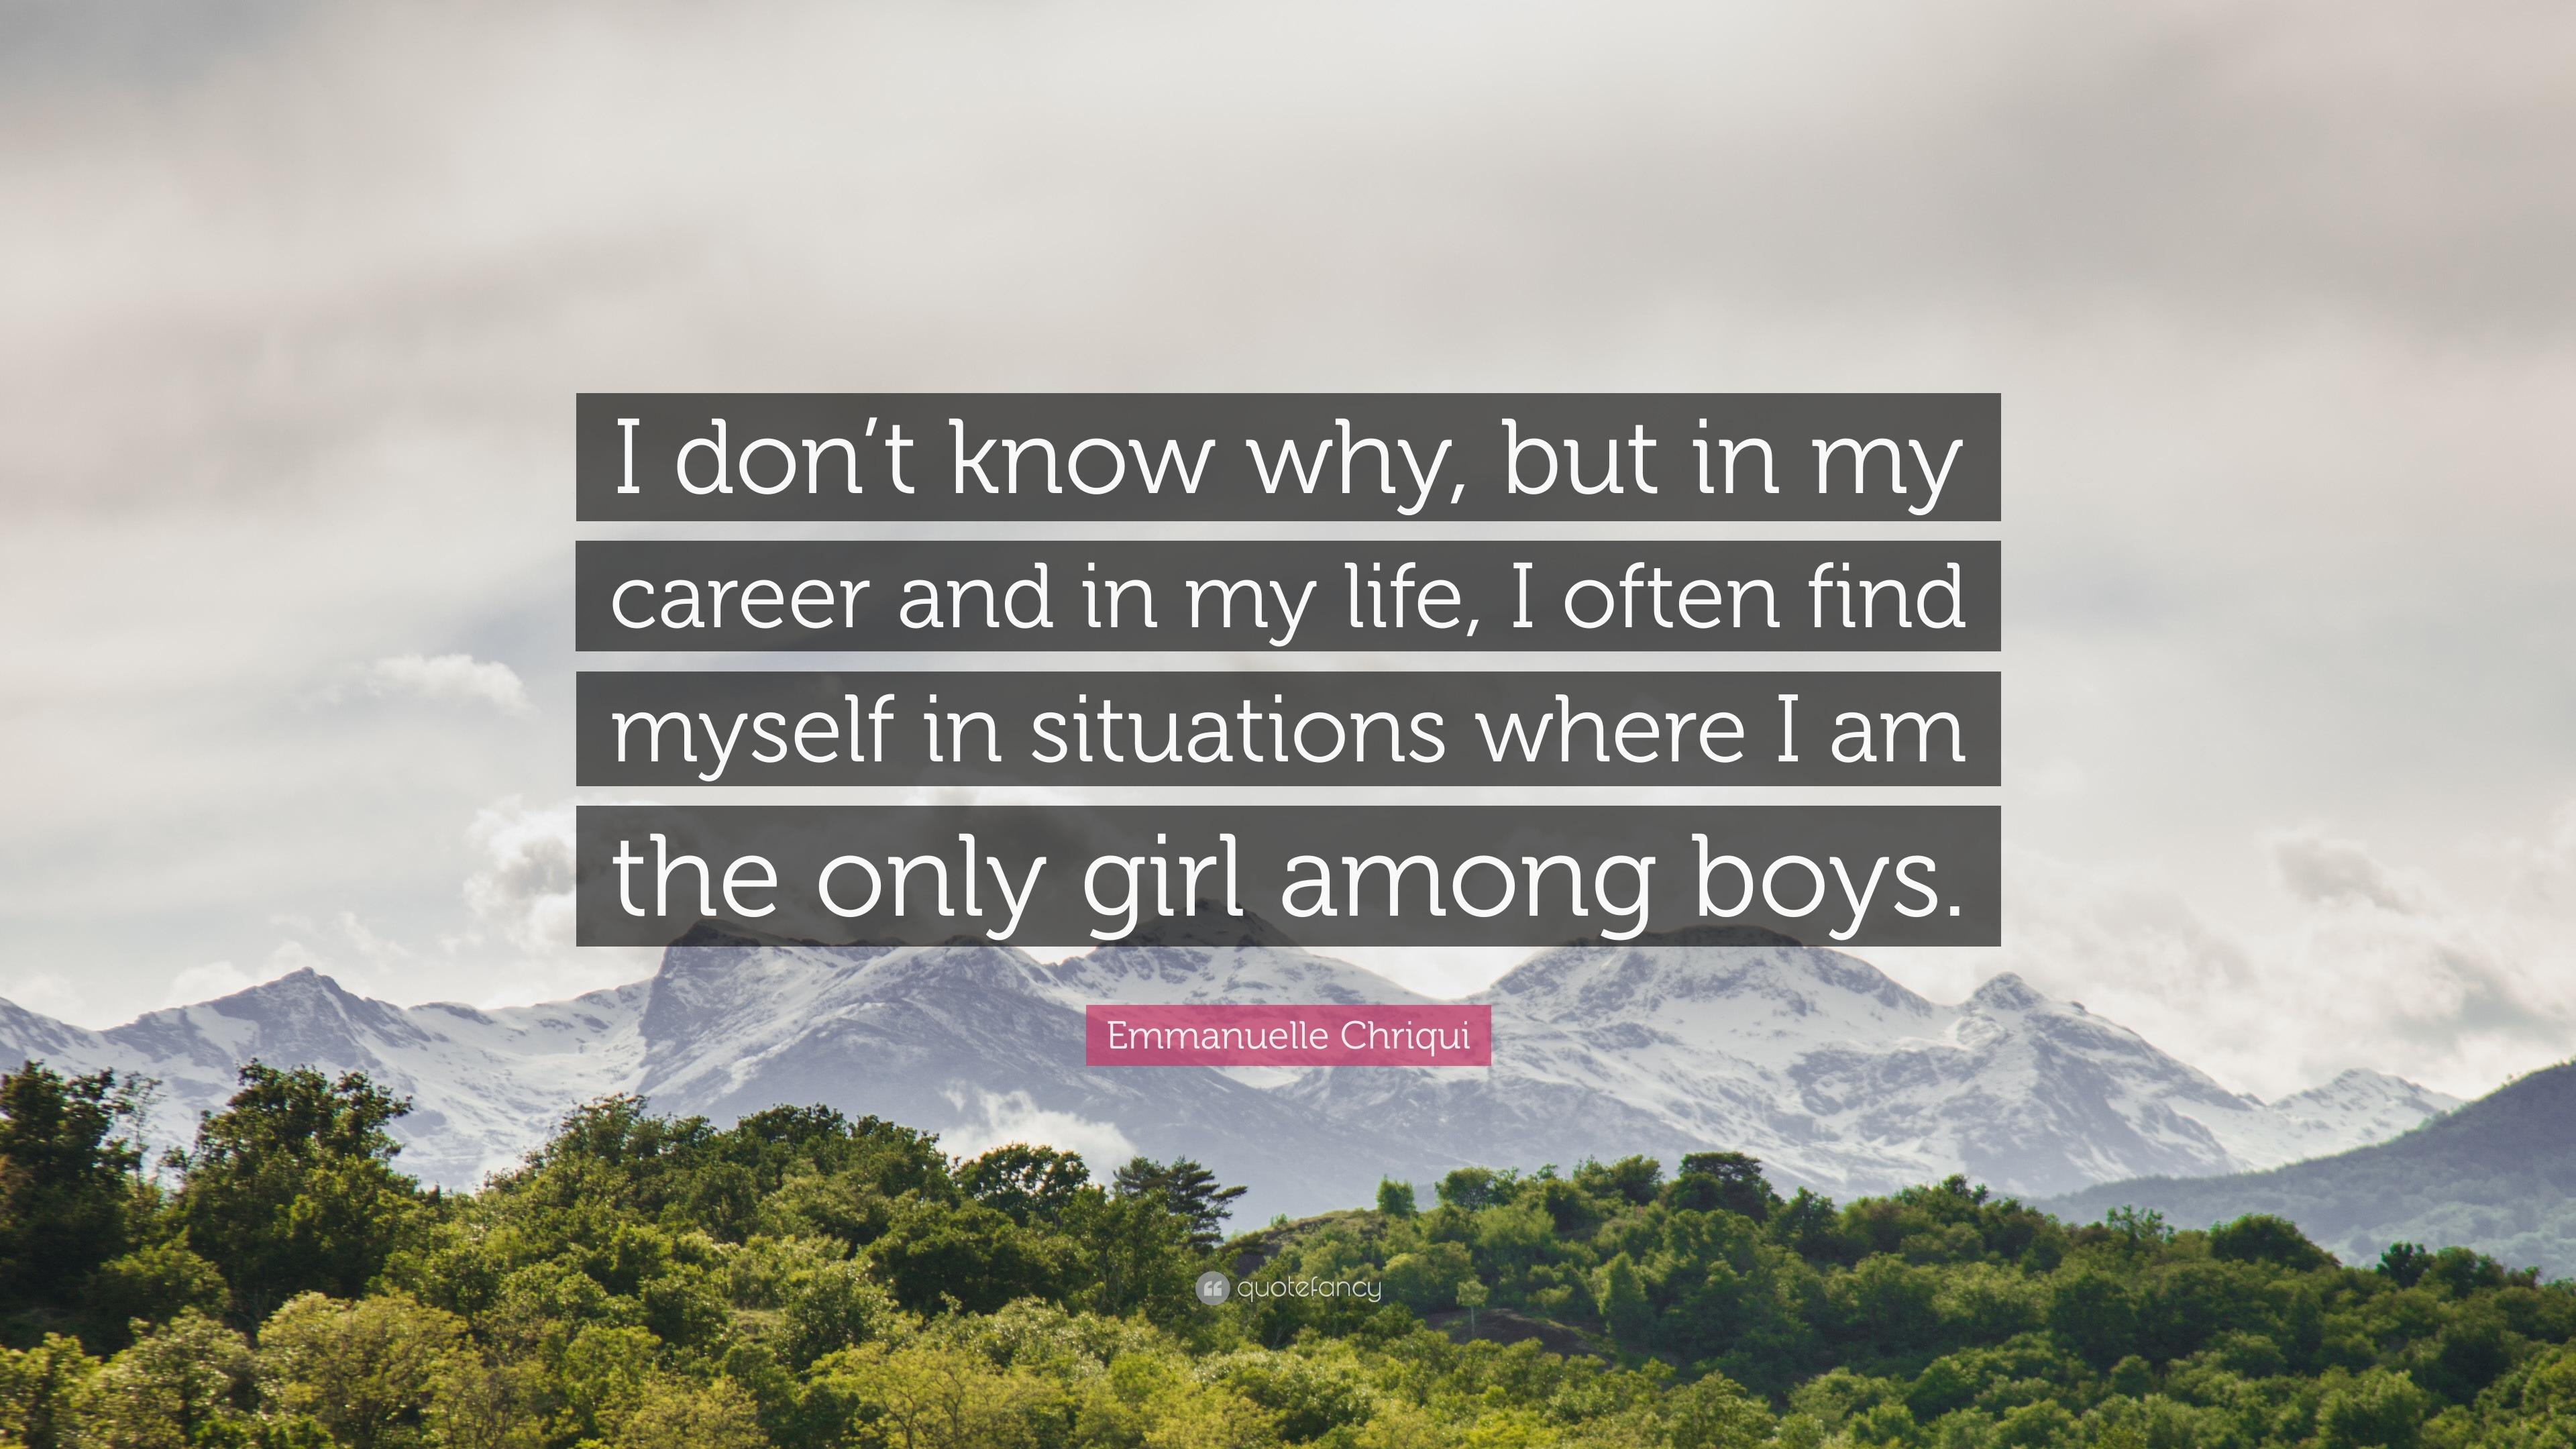 Emmanuelle Chriqui Quote I Don T Know Why But In My Career And In My Life I Often Find Myself In Situations Where I Am The Only Girl Among Boys